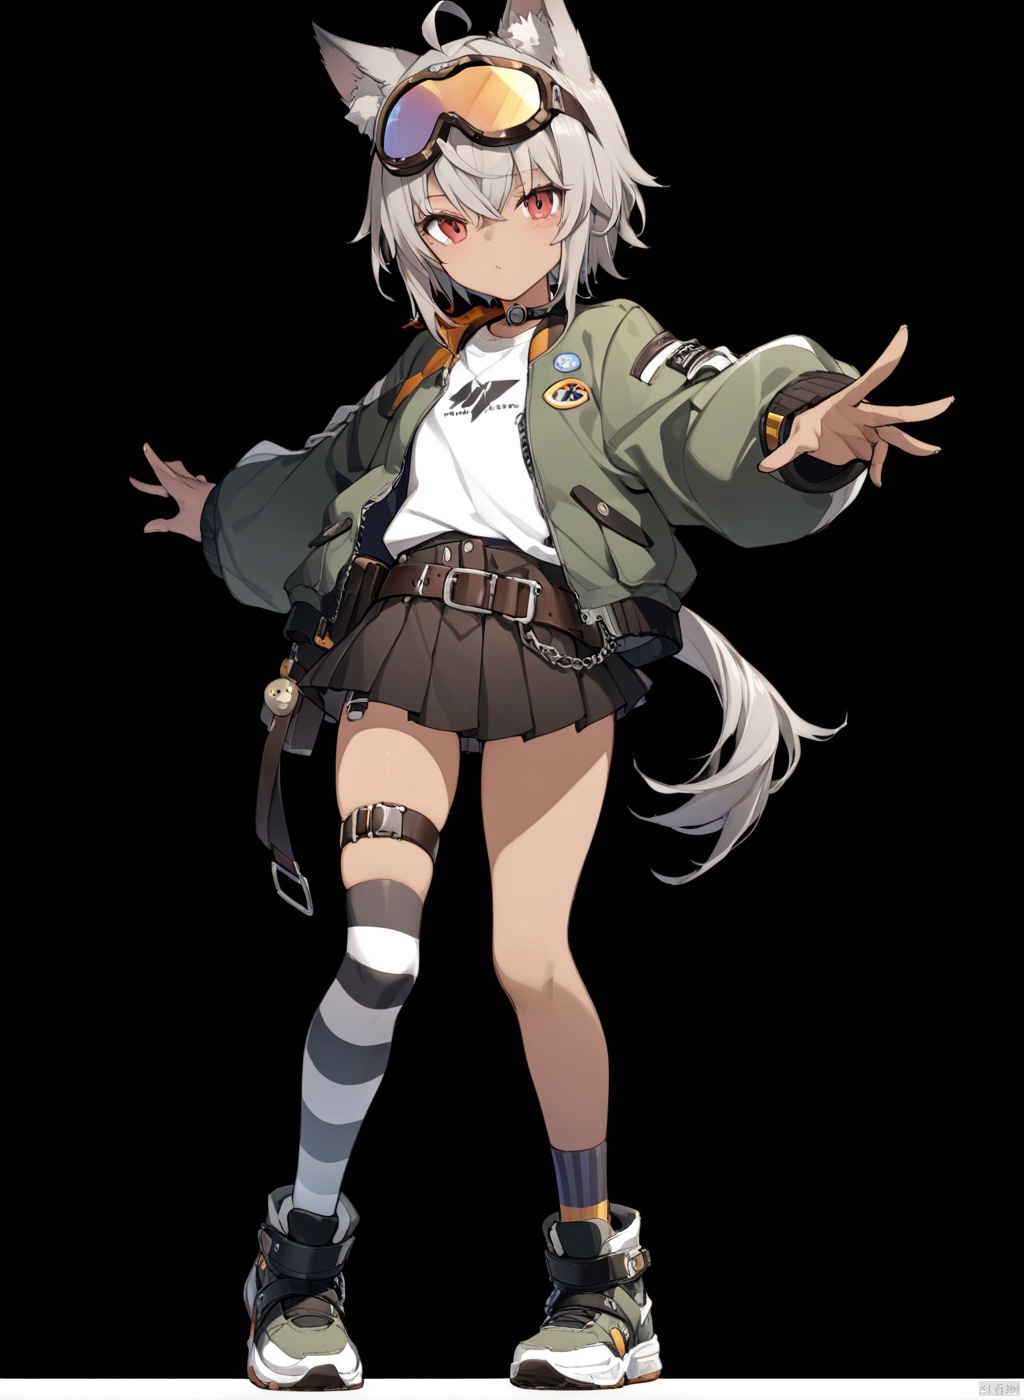  solo, (front view:1.2),shota,masterpiece, best quality,(standing:1.15)
,full body,pose,simple_background, black_background,

,androgynous,round_face,(brown_skin:1.5),,
red eyes,(cool:1.1),cool,

,wolf ears,
gray hair,(short hair with long locks:1.1),sidelocks,ahoge,
short hair,

leg belt,hair_pin,bow, big Zipper head,big Screw, leather goggles,goggles on head,

sneakers,Pleated skirt,belt,Striped stockings,

white shirt,big flight jacket, anime